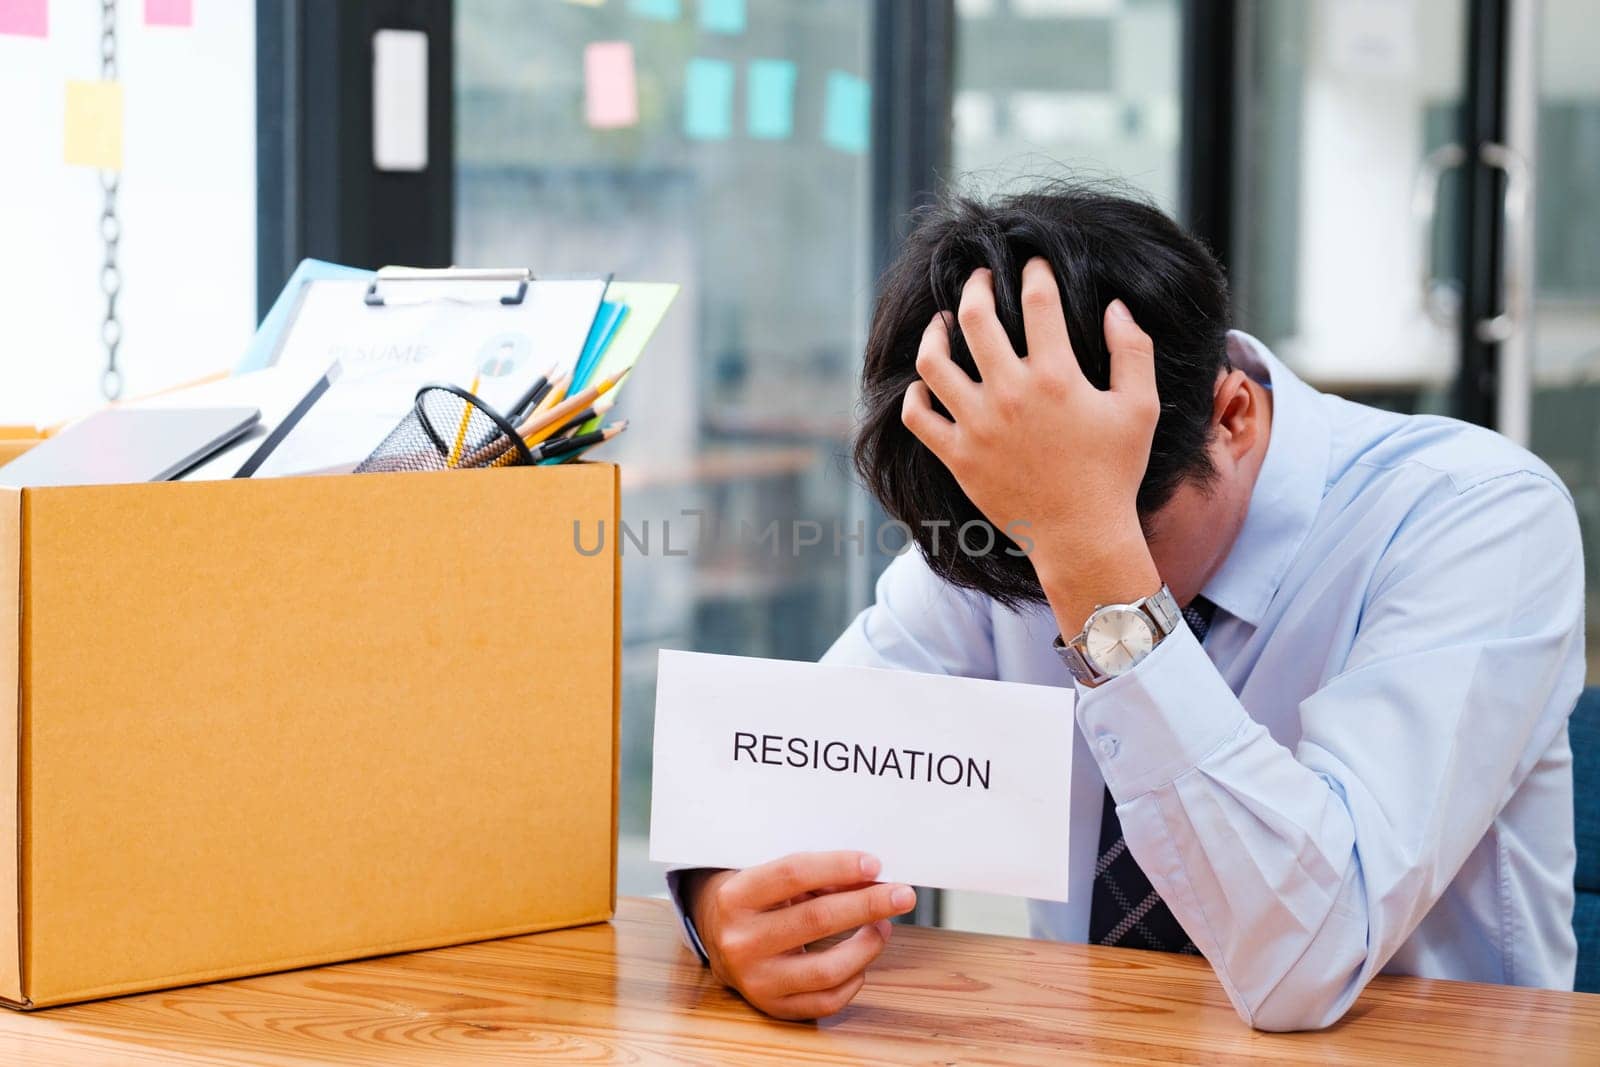 Contemplative Man at Office Desk with Packed Box and Resignation Letter, Reflecting on Career Change and Next Steps